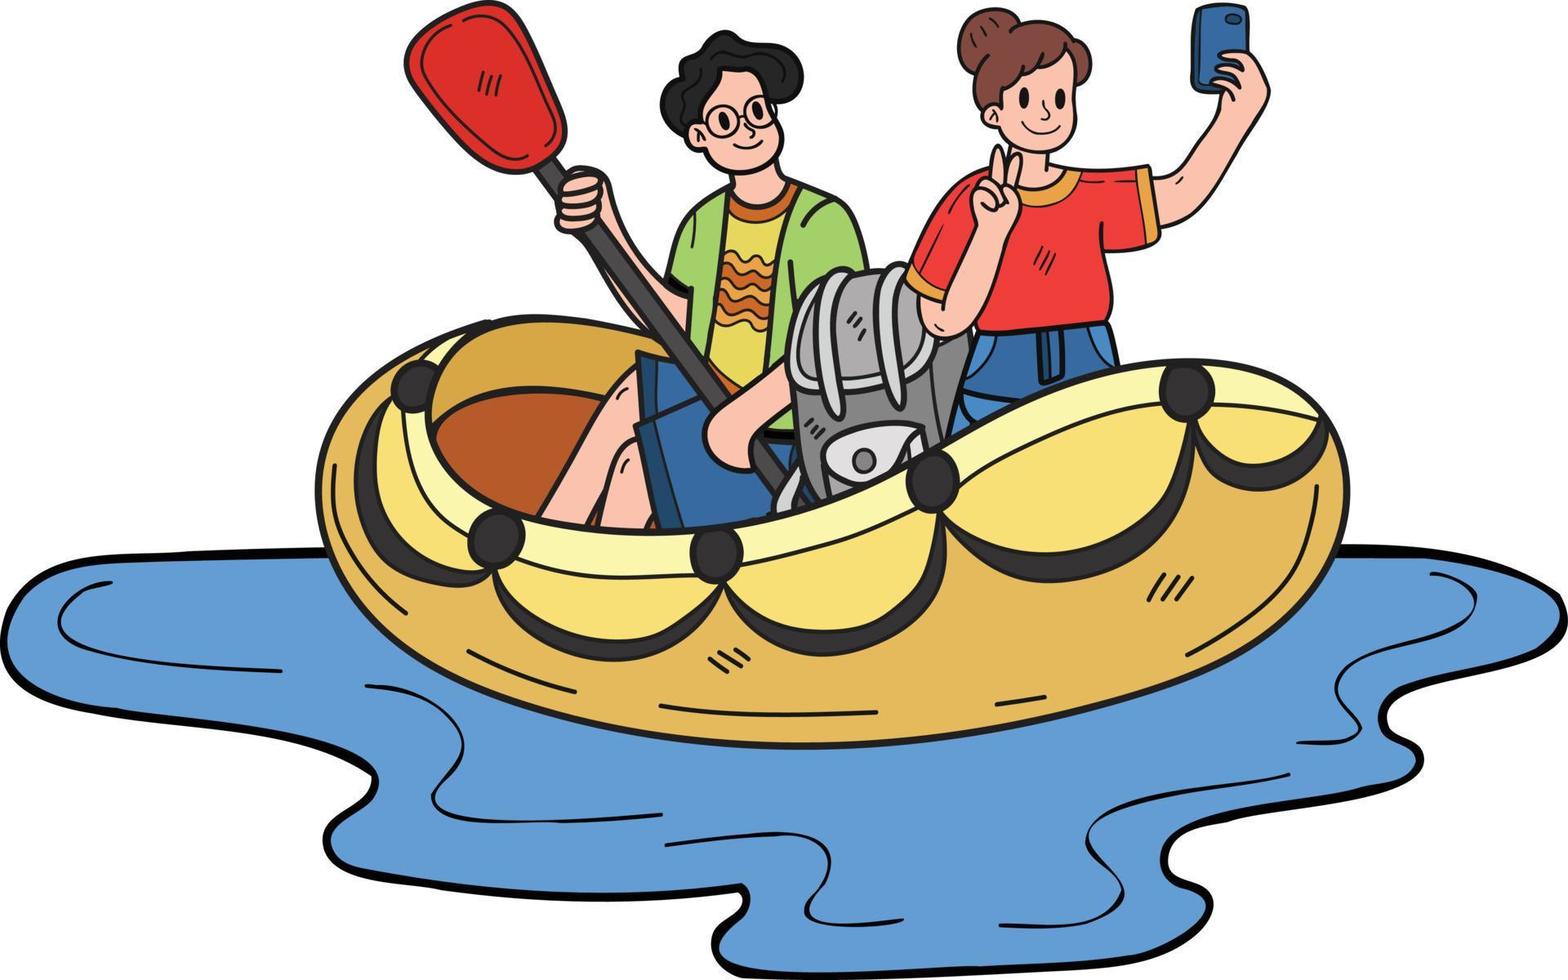 couple taking selfie on boat illustration in doodle style vector